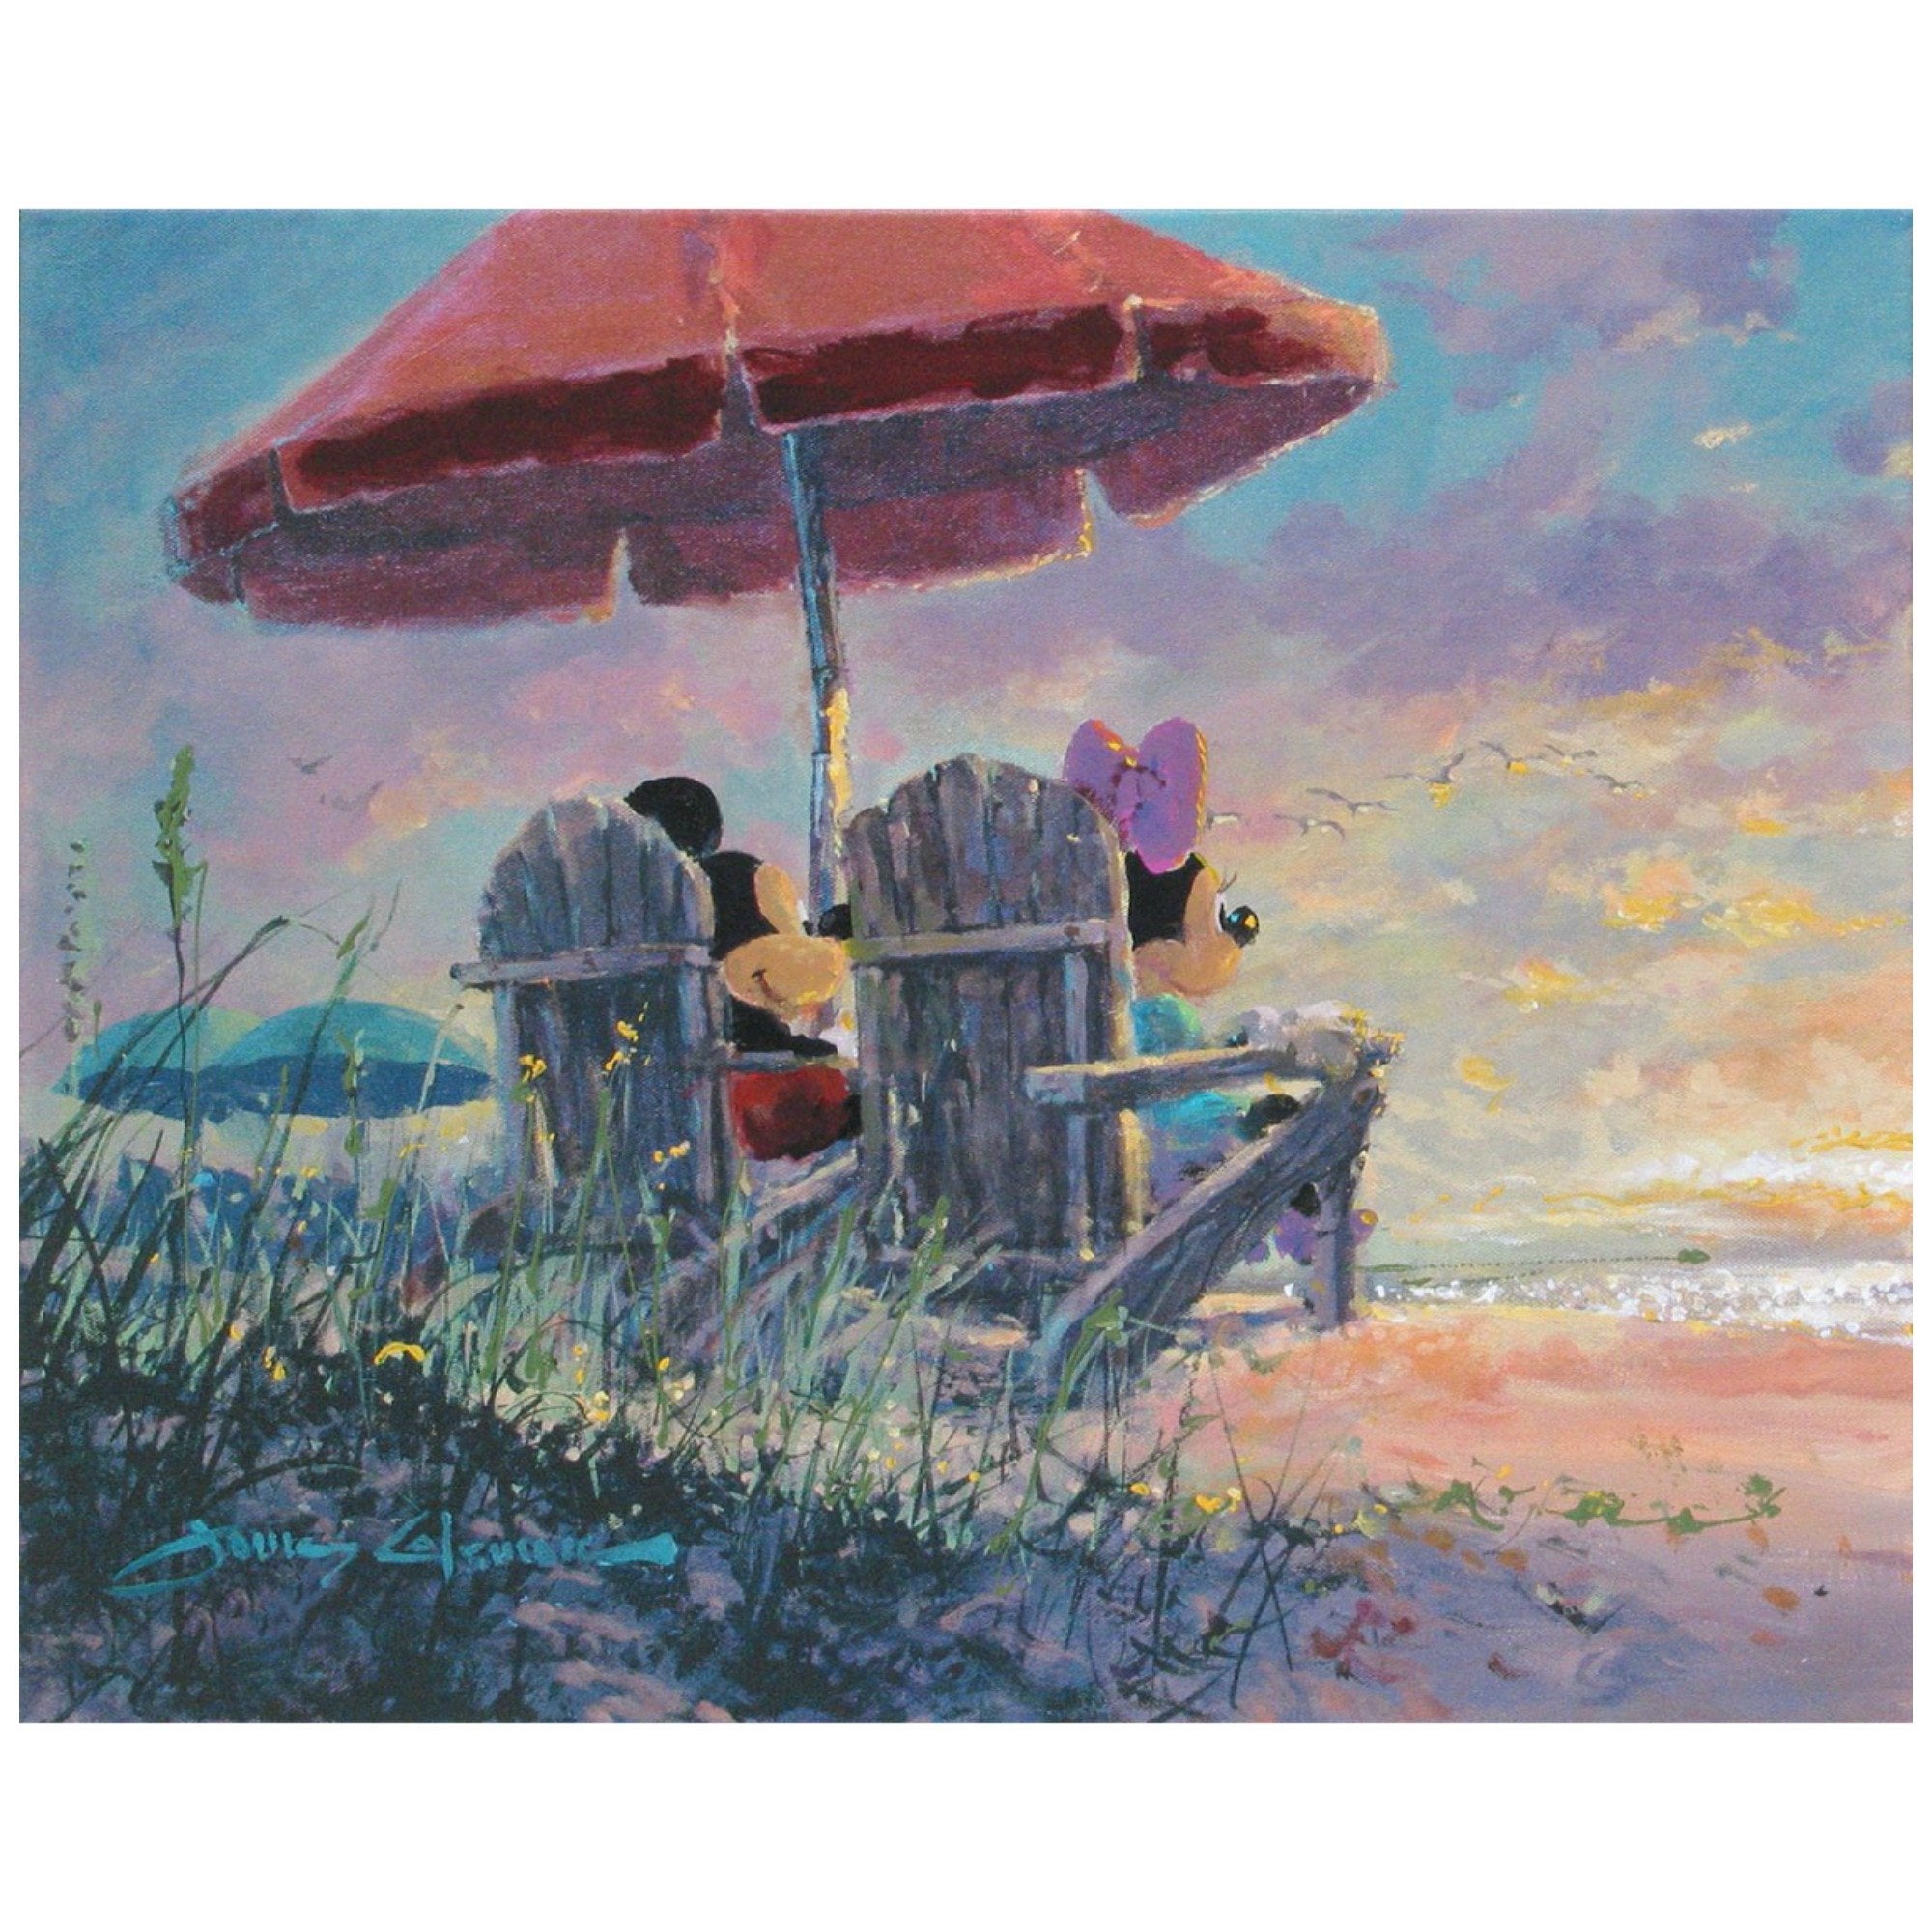 Our Sunset by James Coleman  Mickey and Minnie are enjoying the sunset at the beach while sitting on Adirondack chairs under a red umbrella.